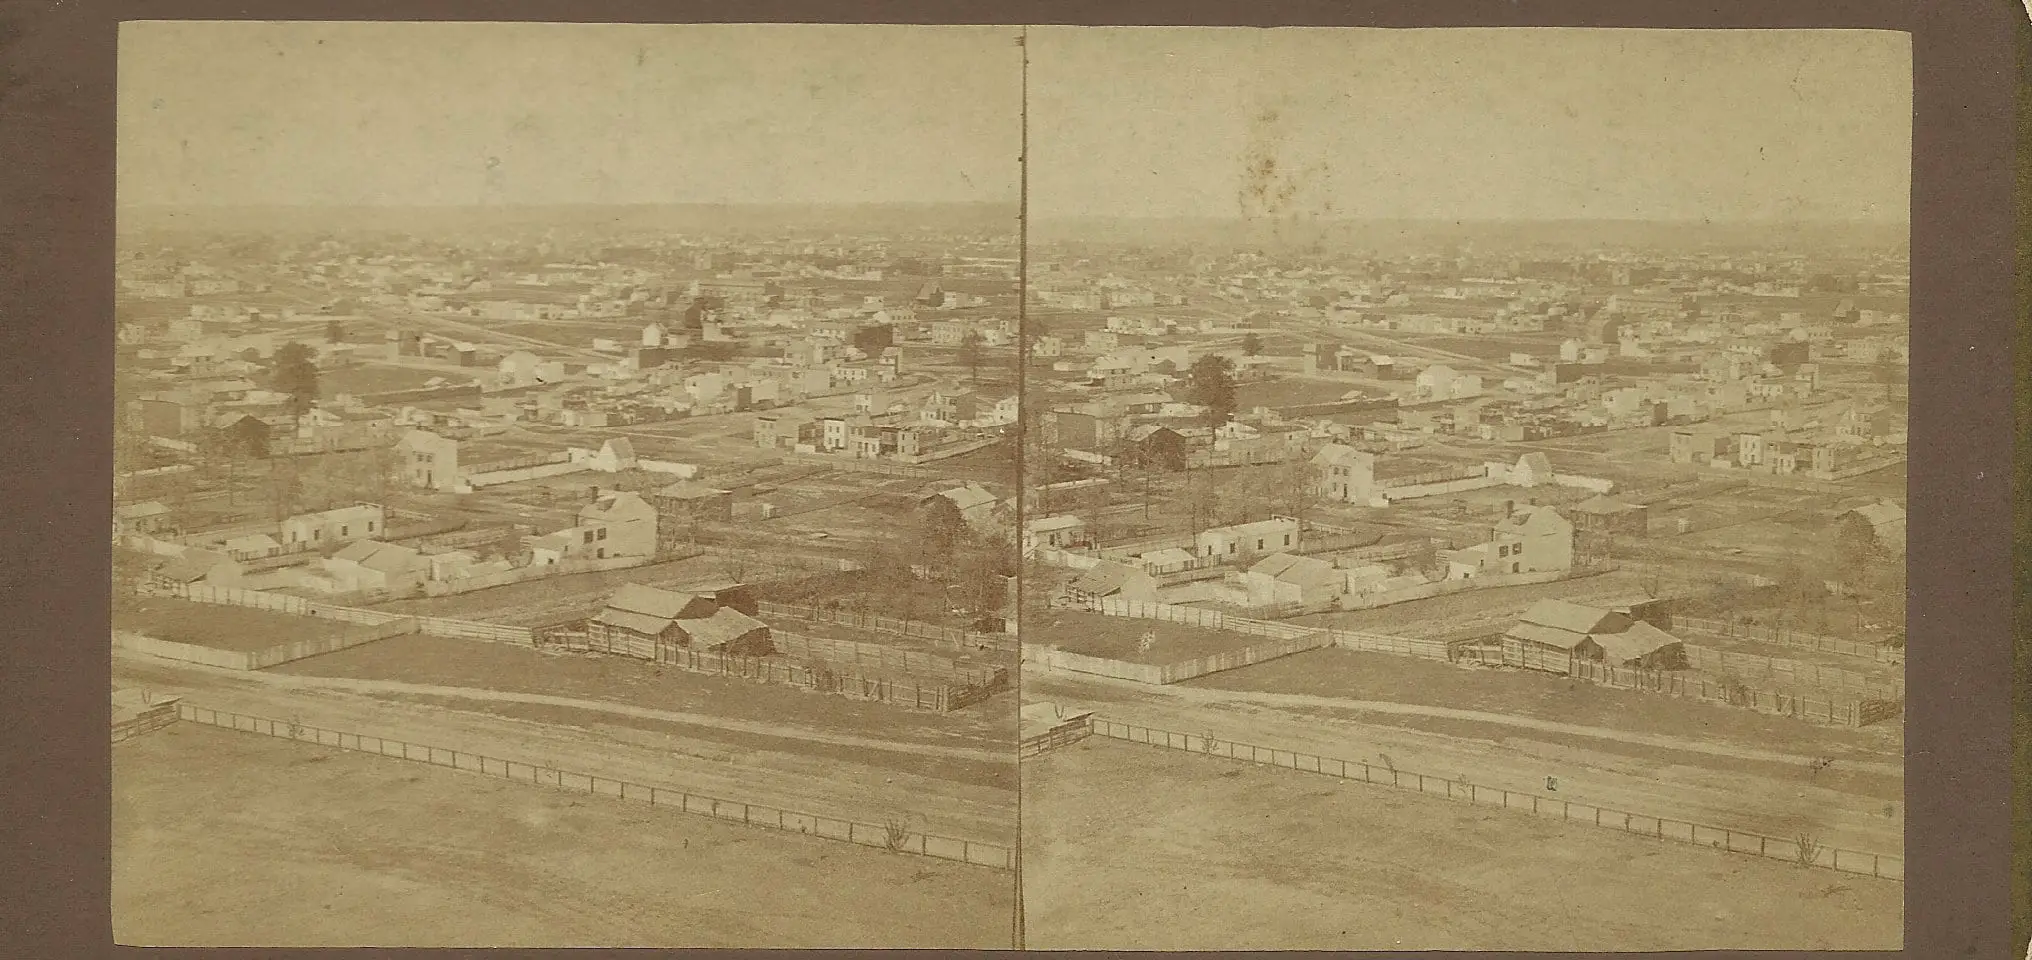 1870s view